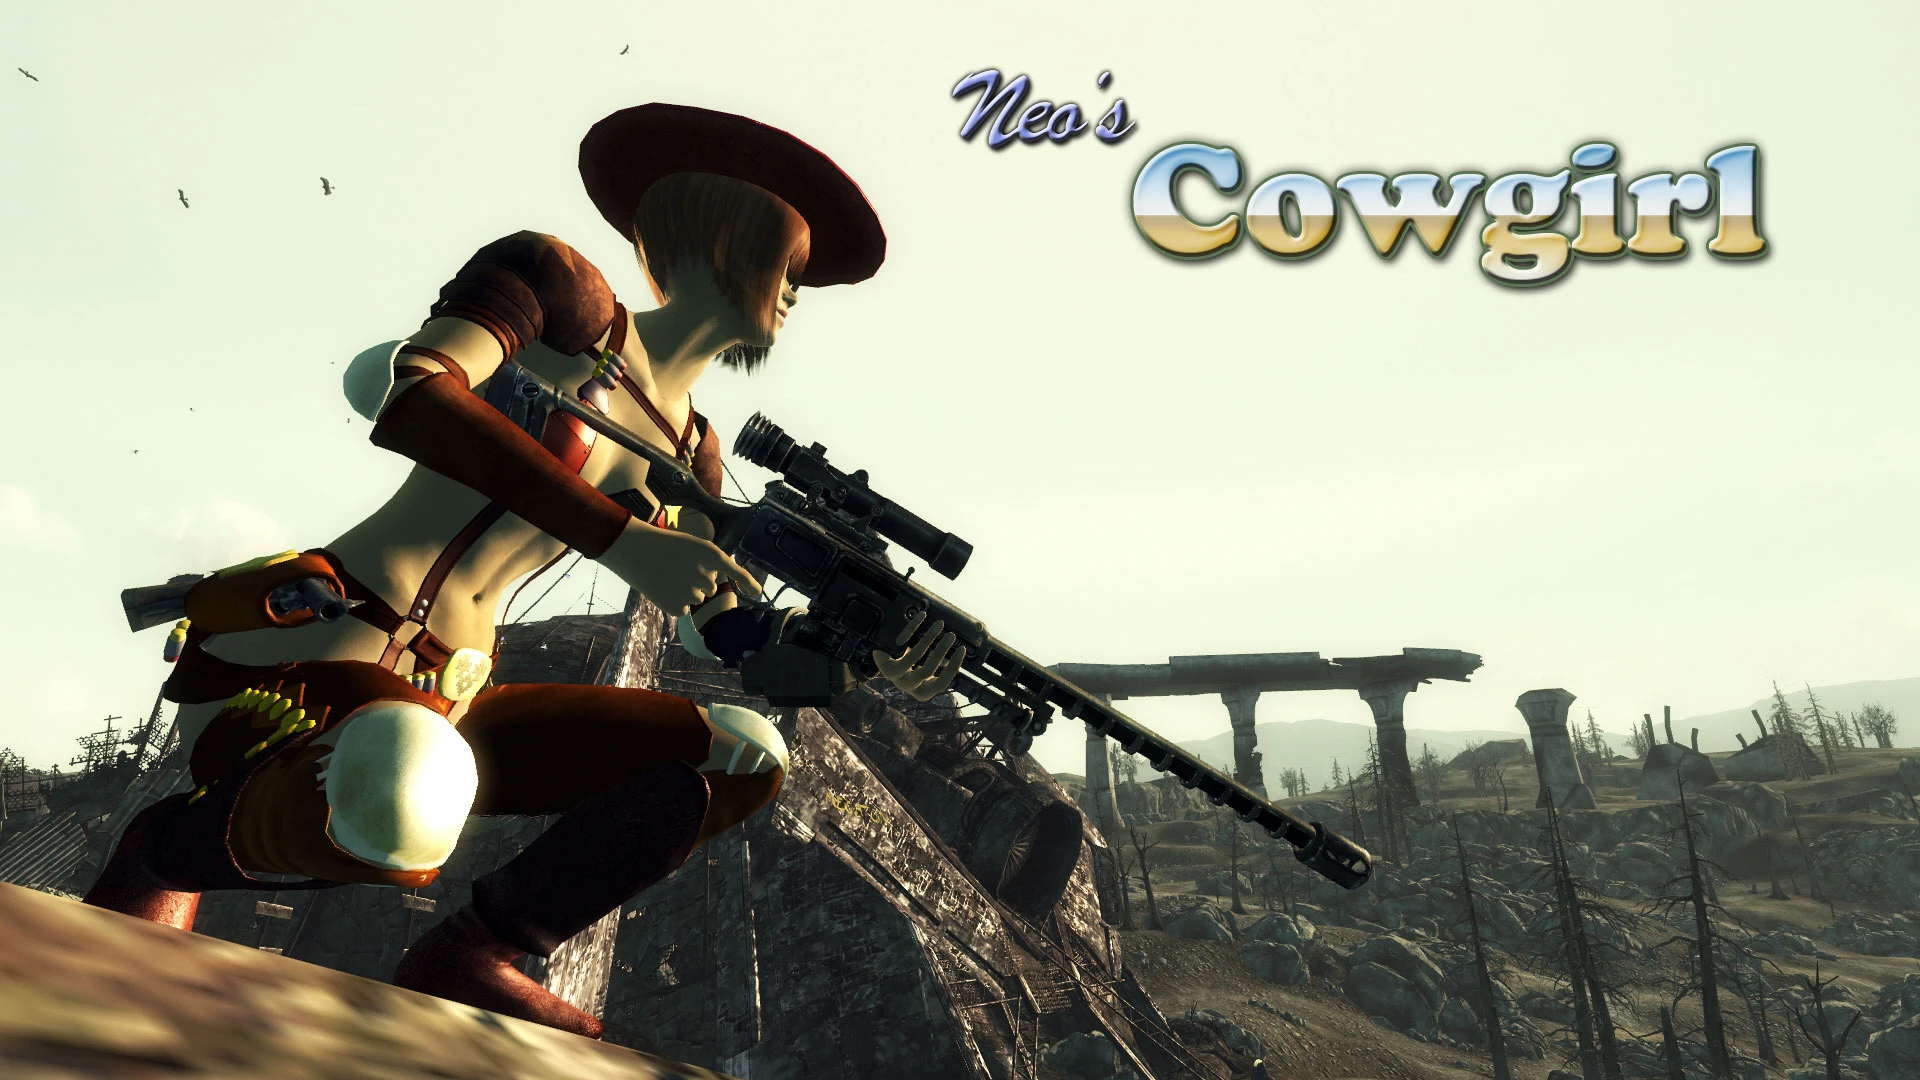 Miss t game. Фоллаут Нью Вегас прически. Fallout New Vegas Cowgirl. Мисс удача Fallout New Vegas. Cowgirl игра.